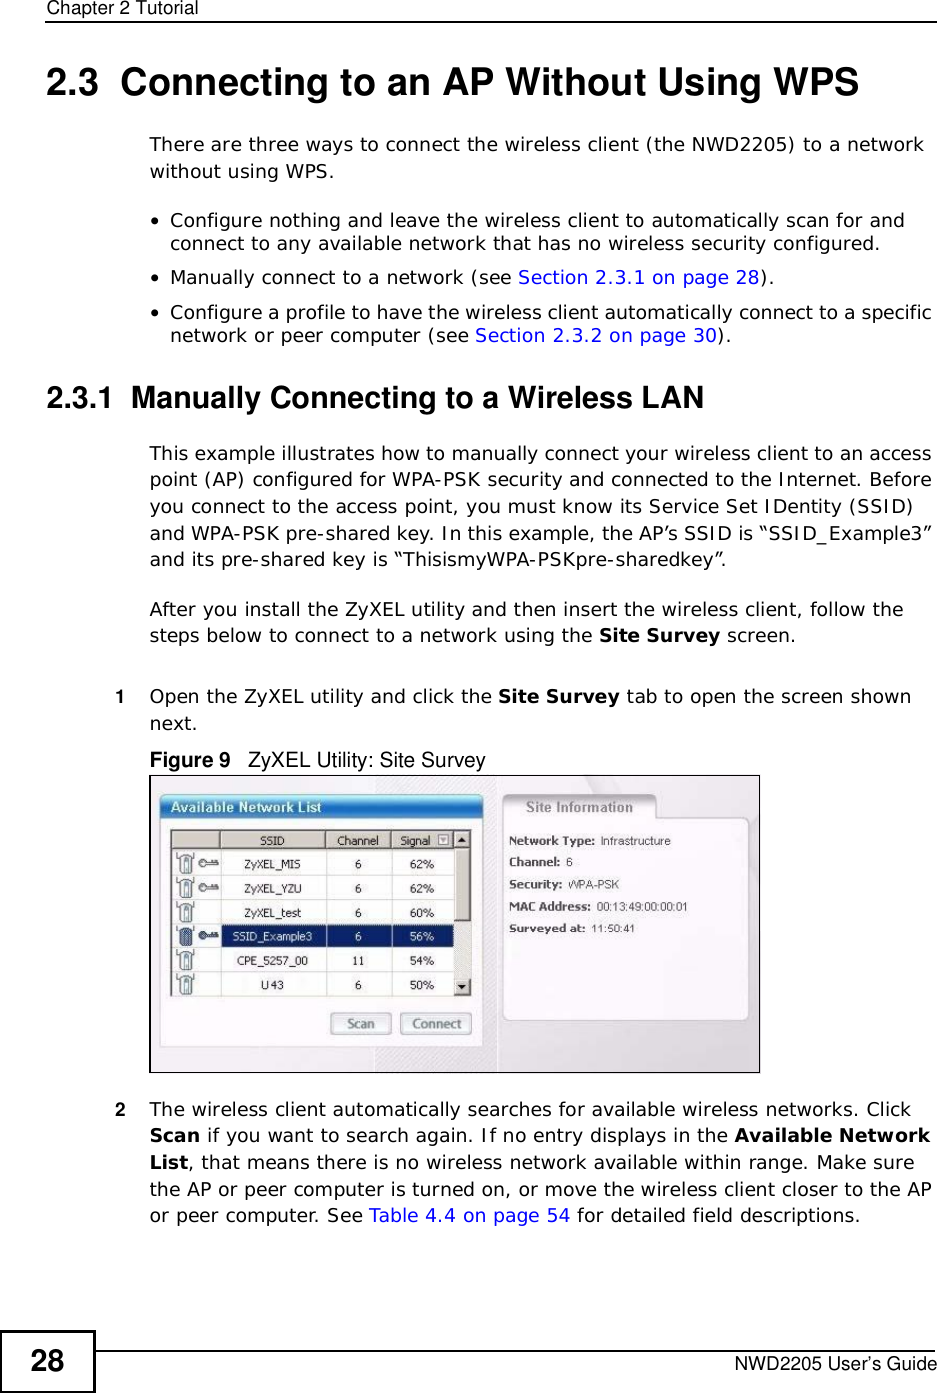 Chapter 2TutorialNWD2205 User’s Guide282.3  Connecting to an AP Without Using WPSThere are three ways to connect the wireless client (the NWD2205) to a network without using WPS.•Configure nothing and leave the wireless client to automatically scan for and connect to any available network that has no wireless security configured.•Manually connect to a network (see Section 2.3.1 on page 28).•Configure a profile to have the wireless client automatically connect to a specific network or peer computer (see Section 2.3.2 on page 30).2.3.1  Manually Connecting to a Wireless LAN This example illustrates how to manually connect your wireless client to an access point (AP) configured for WPA-PSK security and connected to the Internet. Before you connect to the access point, you must know its Service Set IDentity (SSID) and WPA-PSK pre-shared key. In this example, the AP’s SSID is “SSID_Example3” and its pre-shared key is “ThisismyWPA-PSKpre-sharedkey”. After you install the ZyXEL utility and then insert the wireless client, follow the steps below to connect to a network using the Site Survey screen. 1Open the ZyXEL utility and click the Site Survey tab to open the screen shown next.Figure 9   ZyXEL Utility: Site Survey2The wireless client automatically searches for available wireless networks. Click Scan if you want to search again. If no entry displays in the Available Network List, that means there is no wireless network available within range. Make sure the AP or peer computer is turned on, or move the wireless client closer to the AP or peer computer. See Table 4.4 on page 54 for detailed field descriptions.